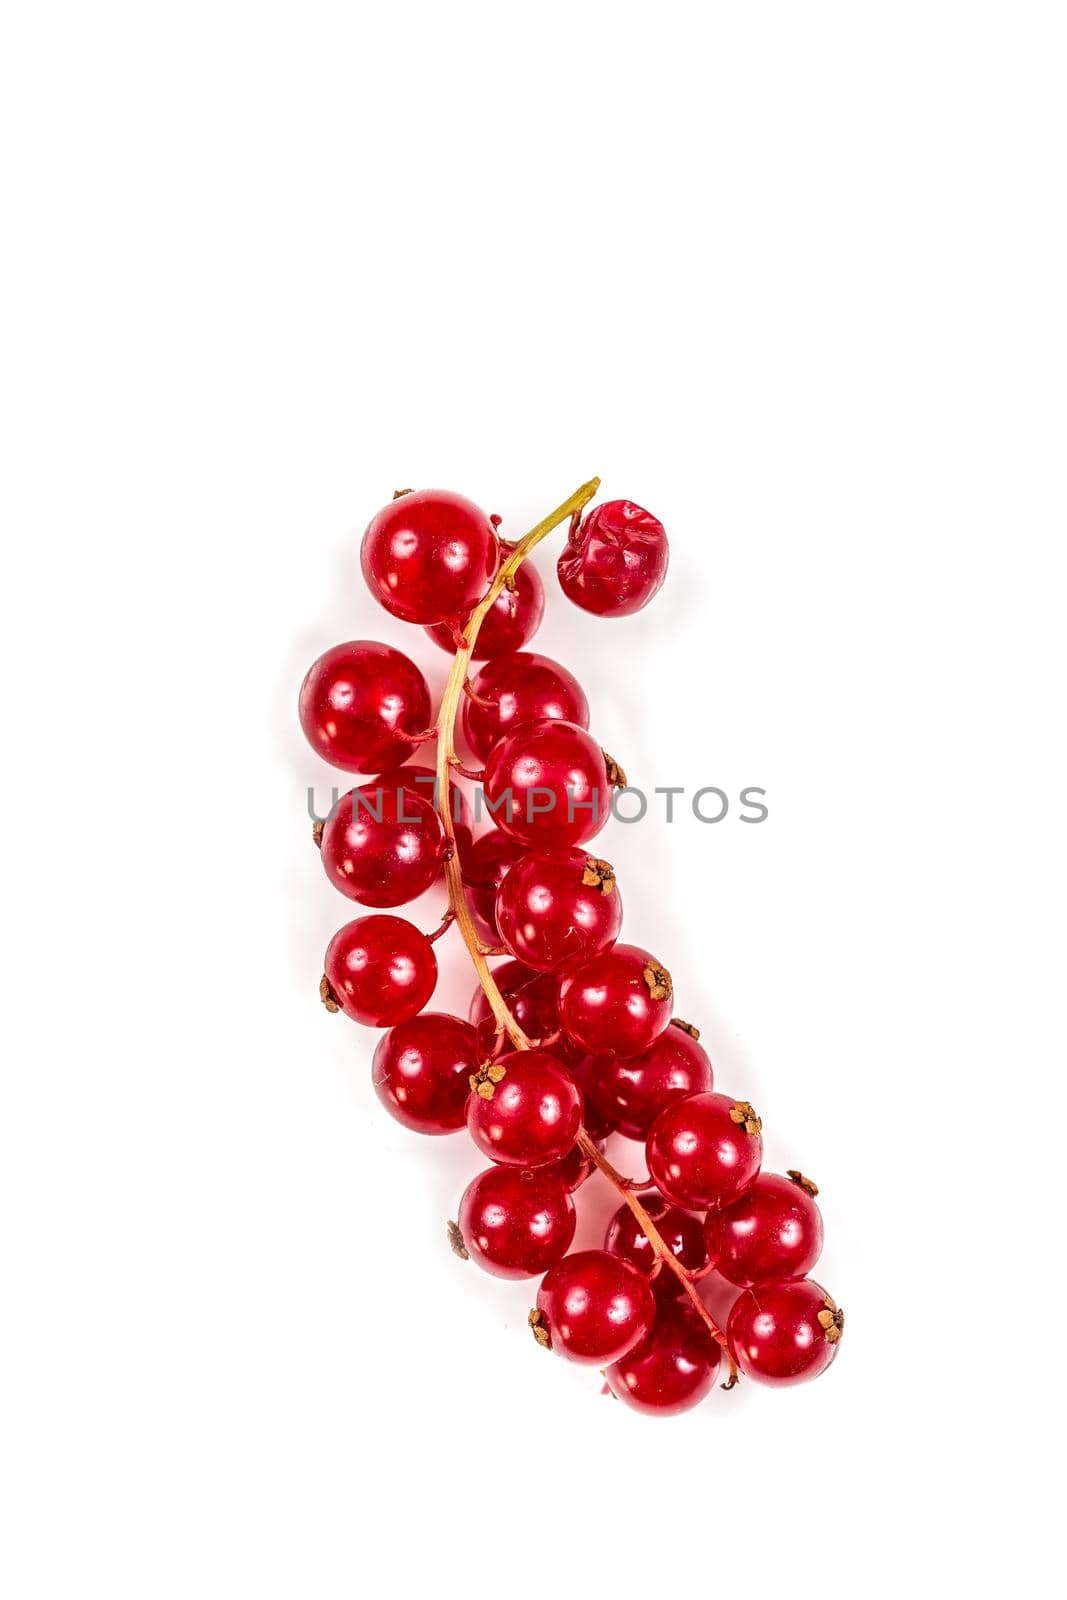 Gooseberries Ribes Rubrum red fruits by JPC-PROD